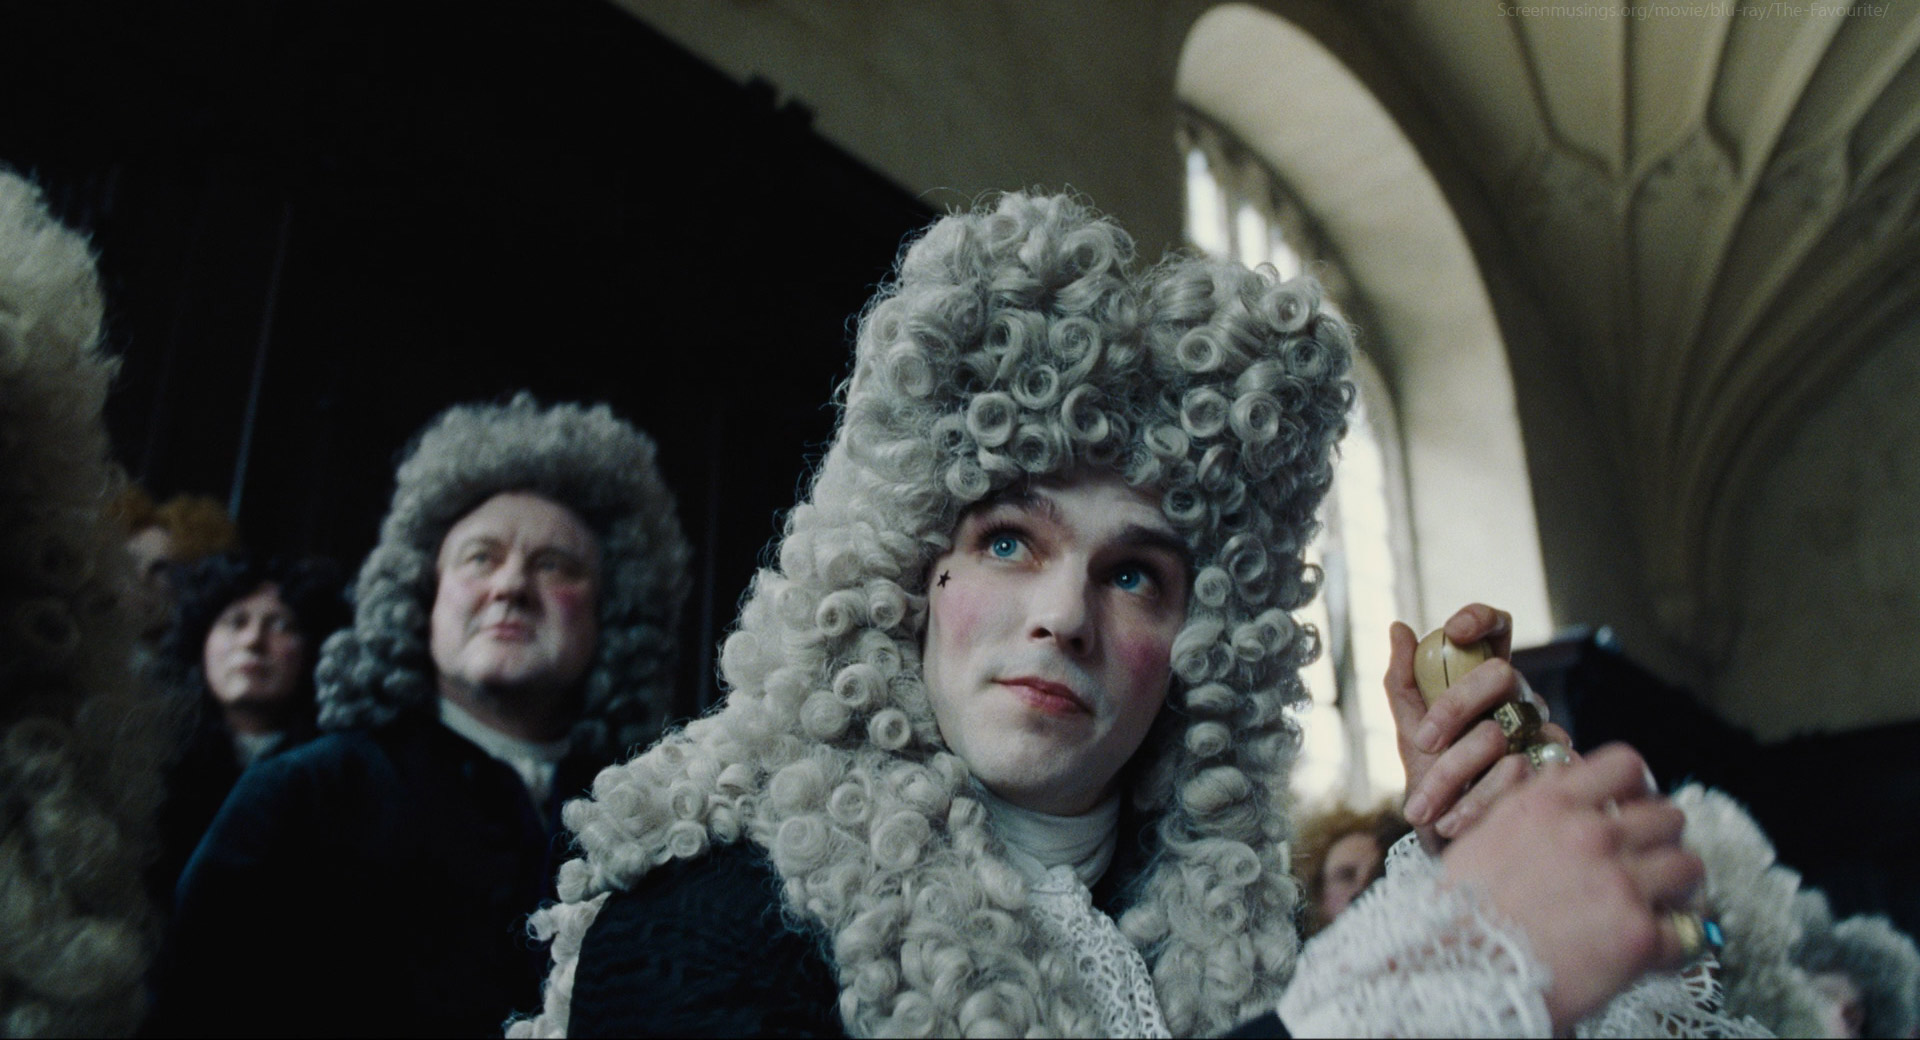 https://screenmusings.org/movie/blu-ray/The-Favourite/images/The-Favourite-220.jpg